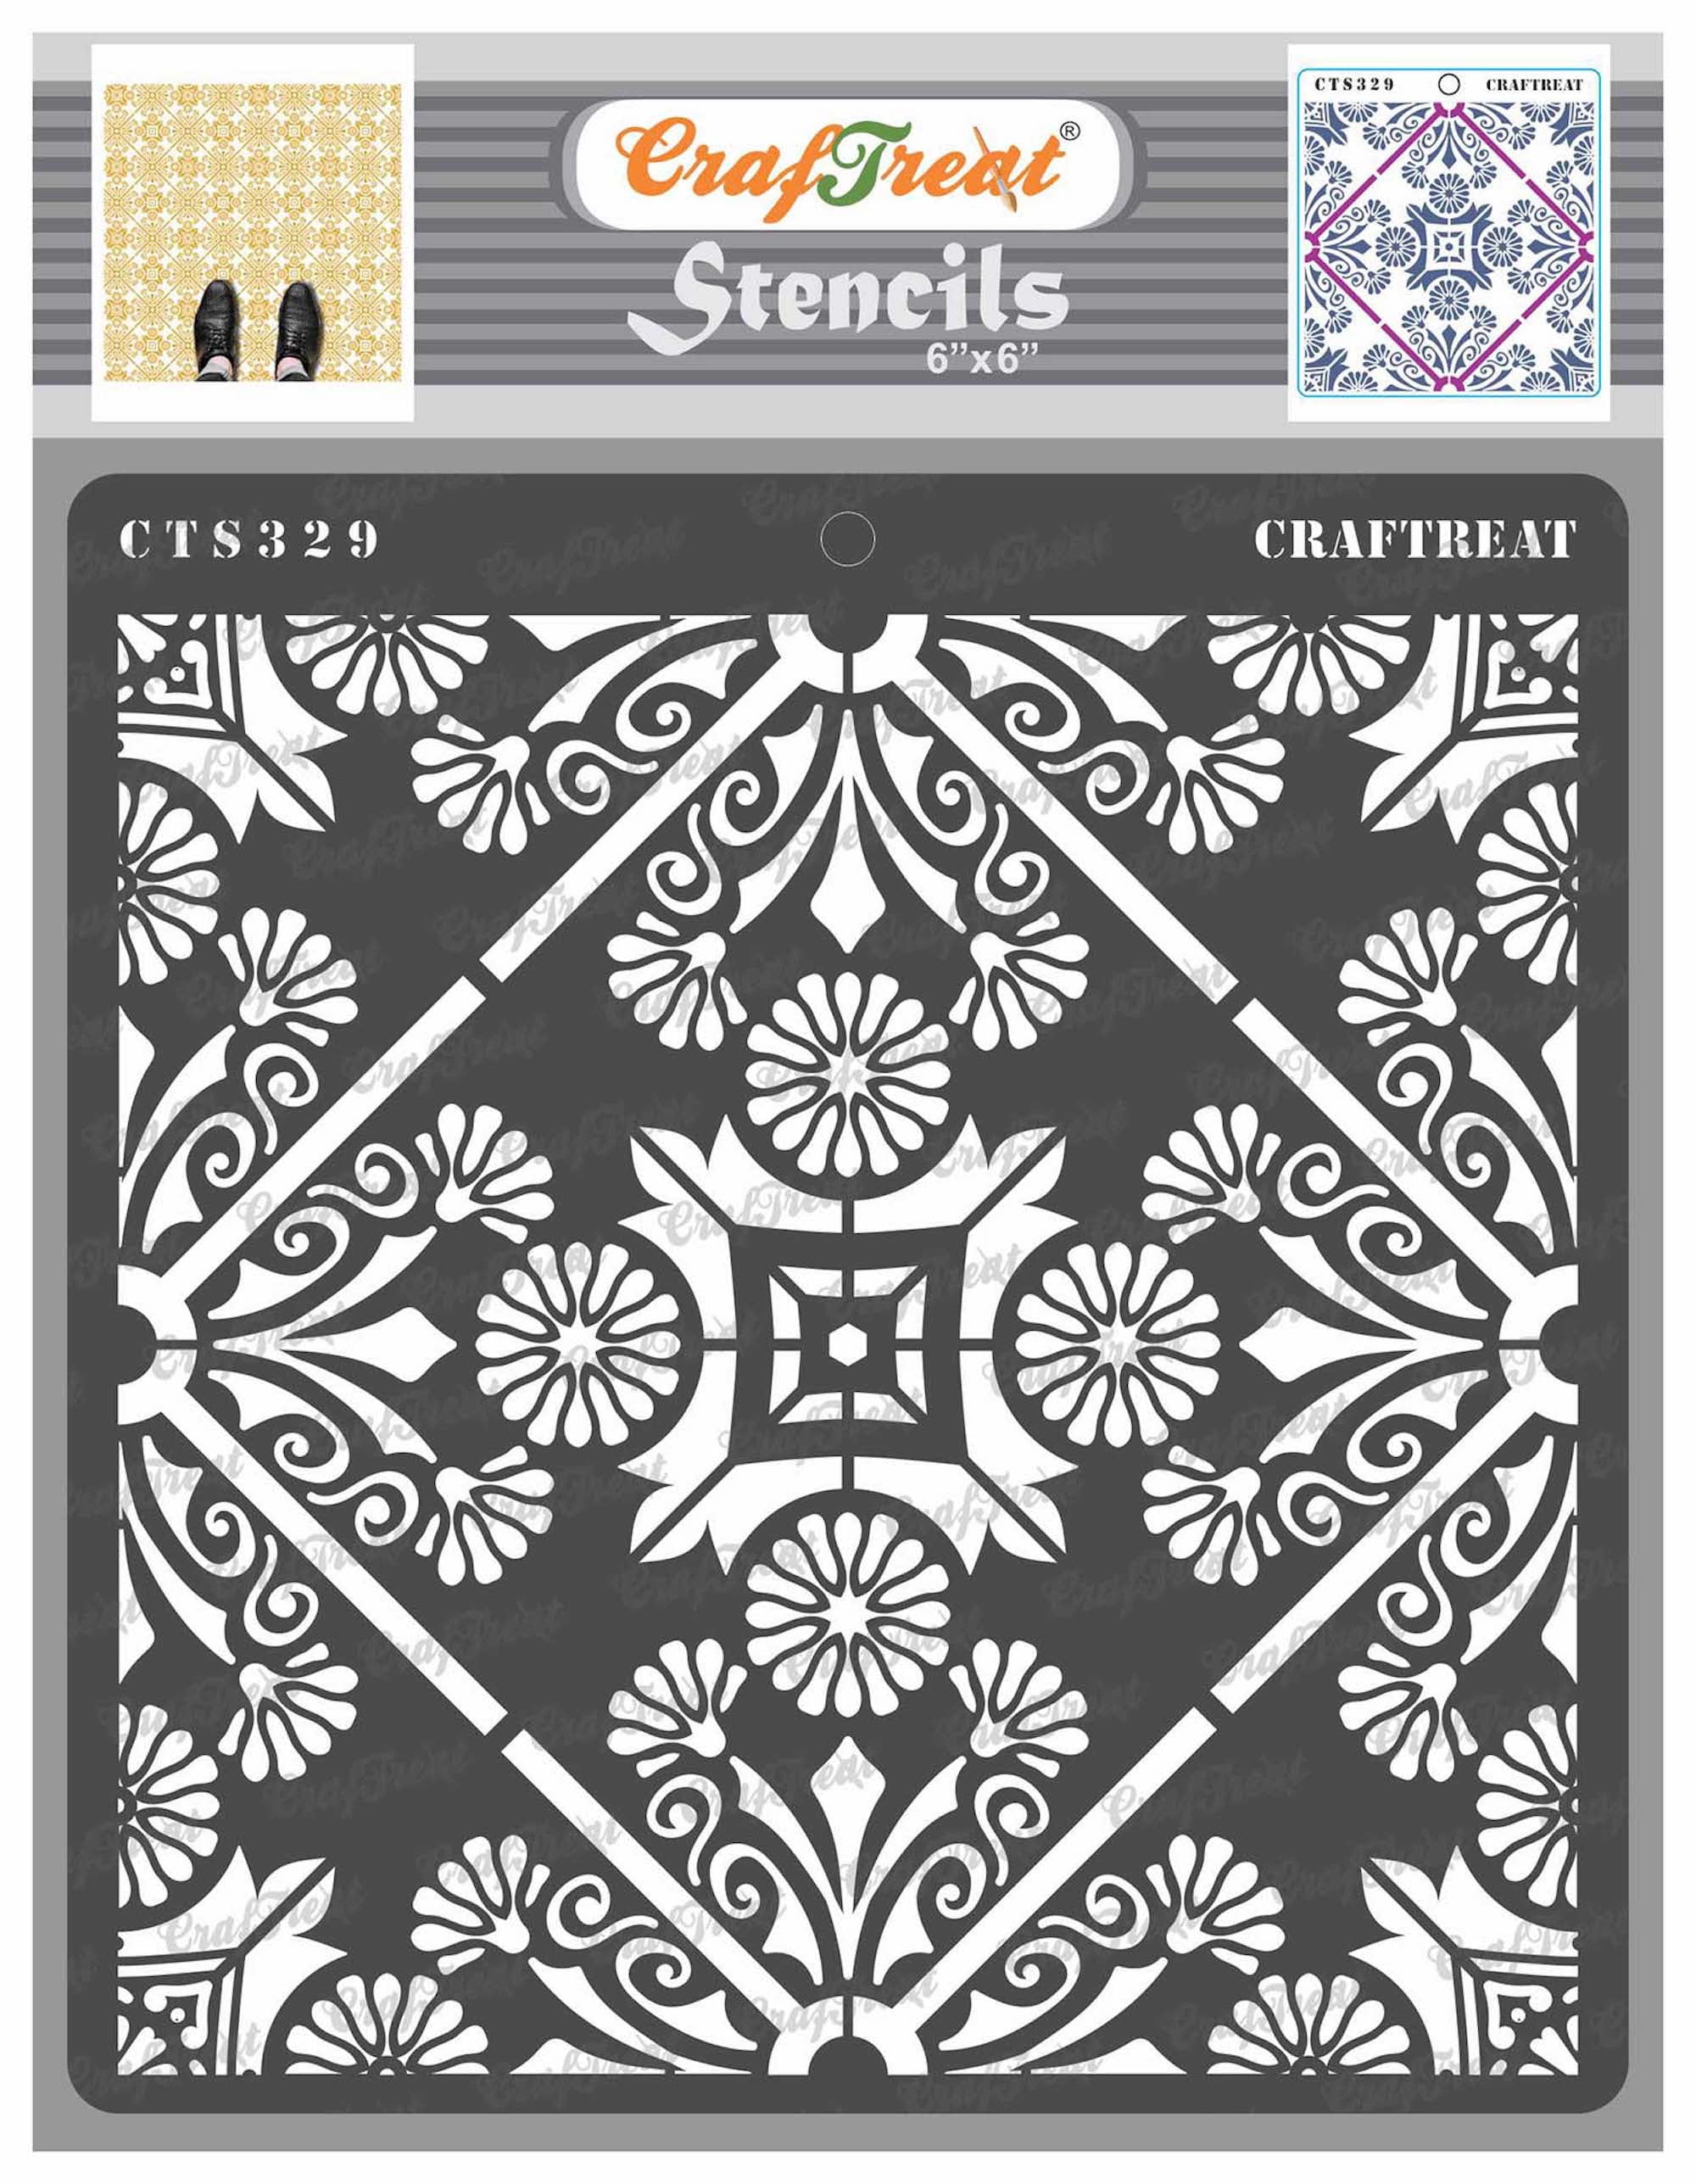 CrafTreat Geometric Stencils for Painting on Wood, Wall, Tile , Canvas and  Floor - Abstract Connected Arcs and 3D Square Pattern - 2 Pcs - 6x6 Inches  Each - Reusable DIY Art and Craft Sten 